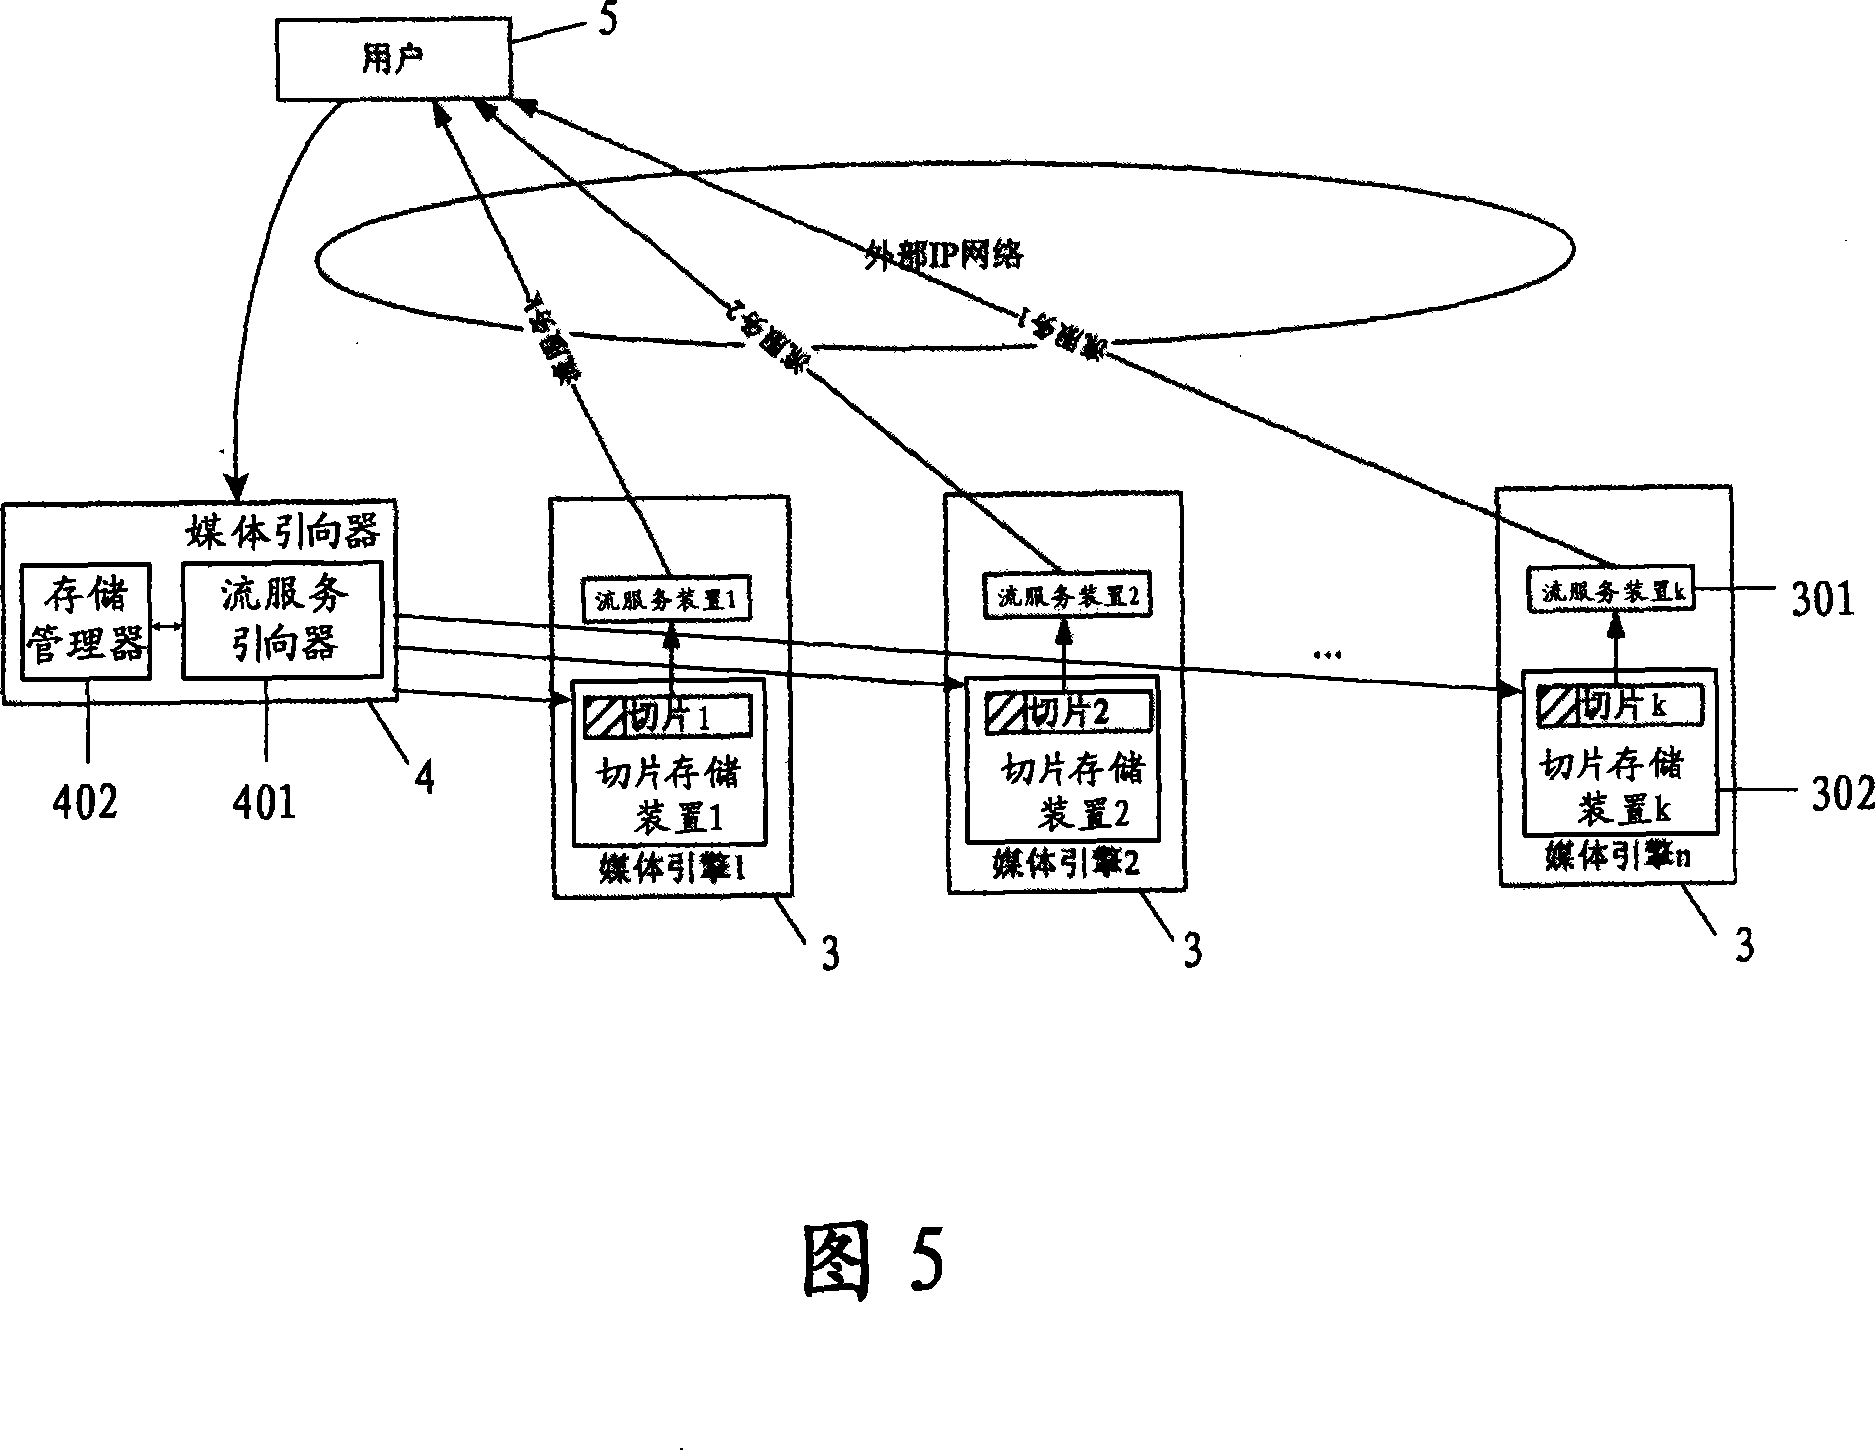 Slice storage and streaming service method for stream media system and multimedia files